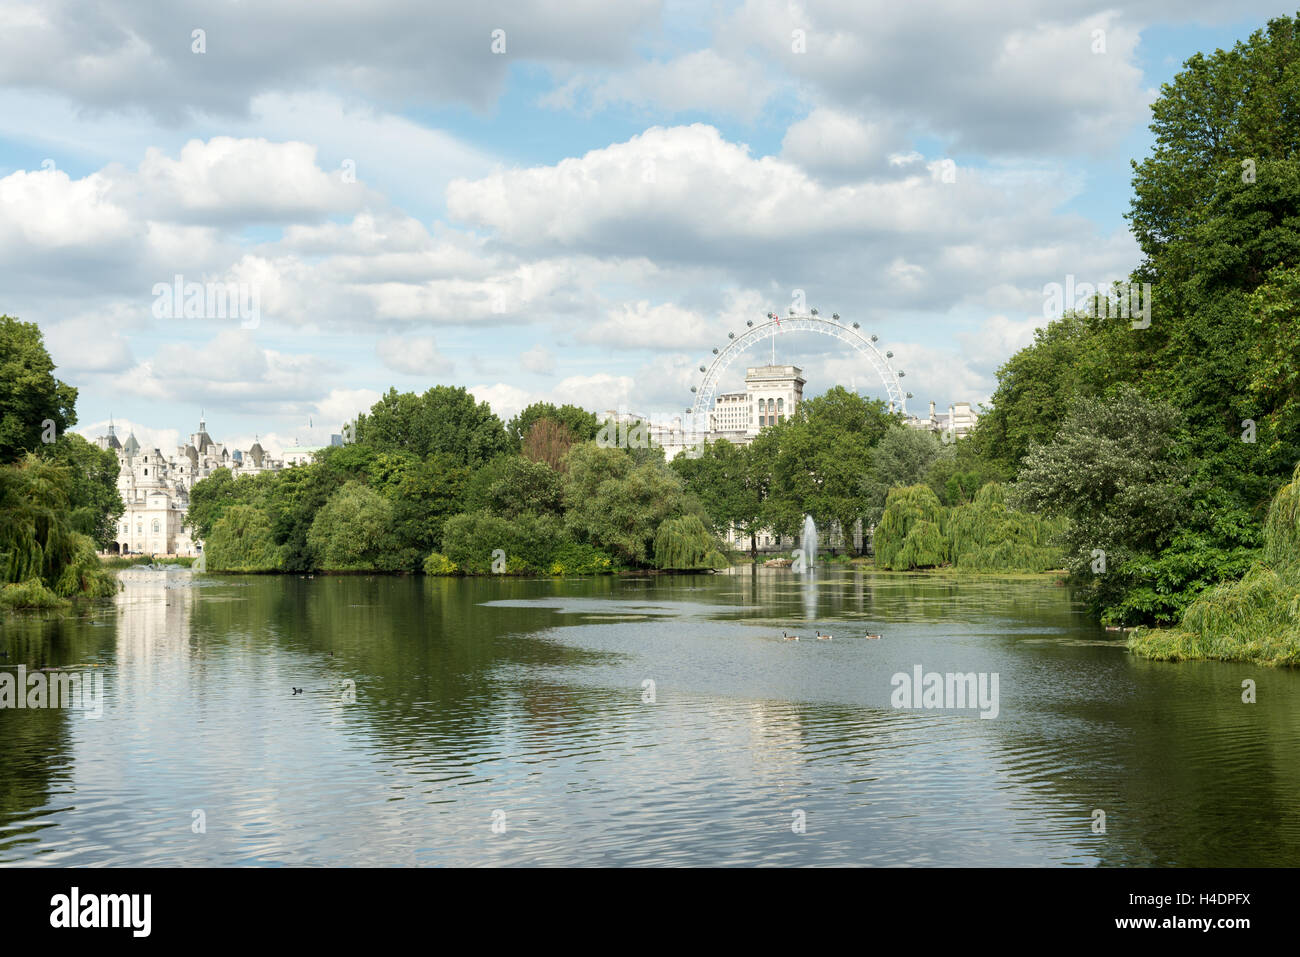 The lake in St James's Park, Westminster, London, England, UK Stock Photo